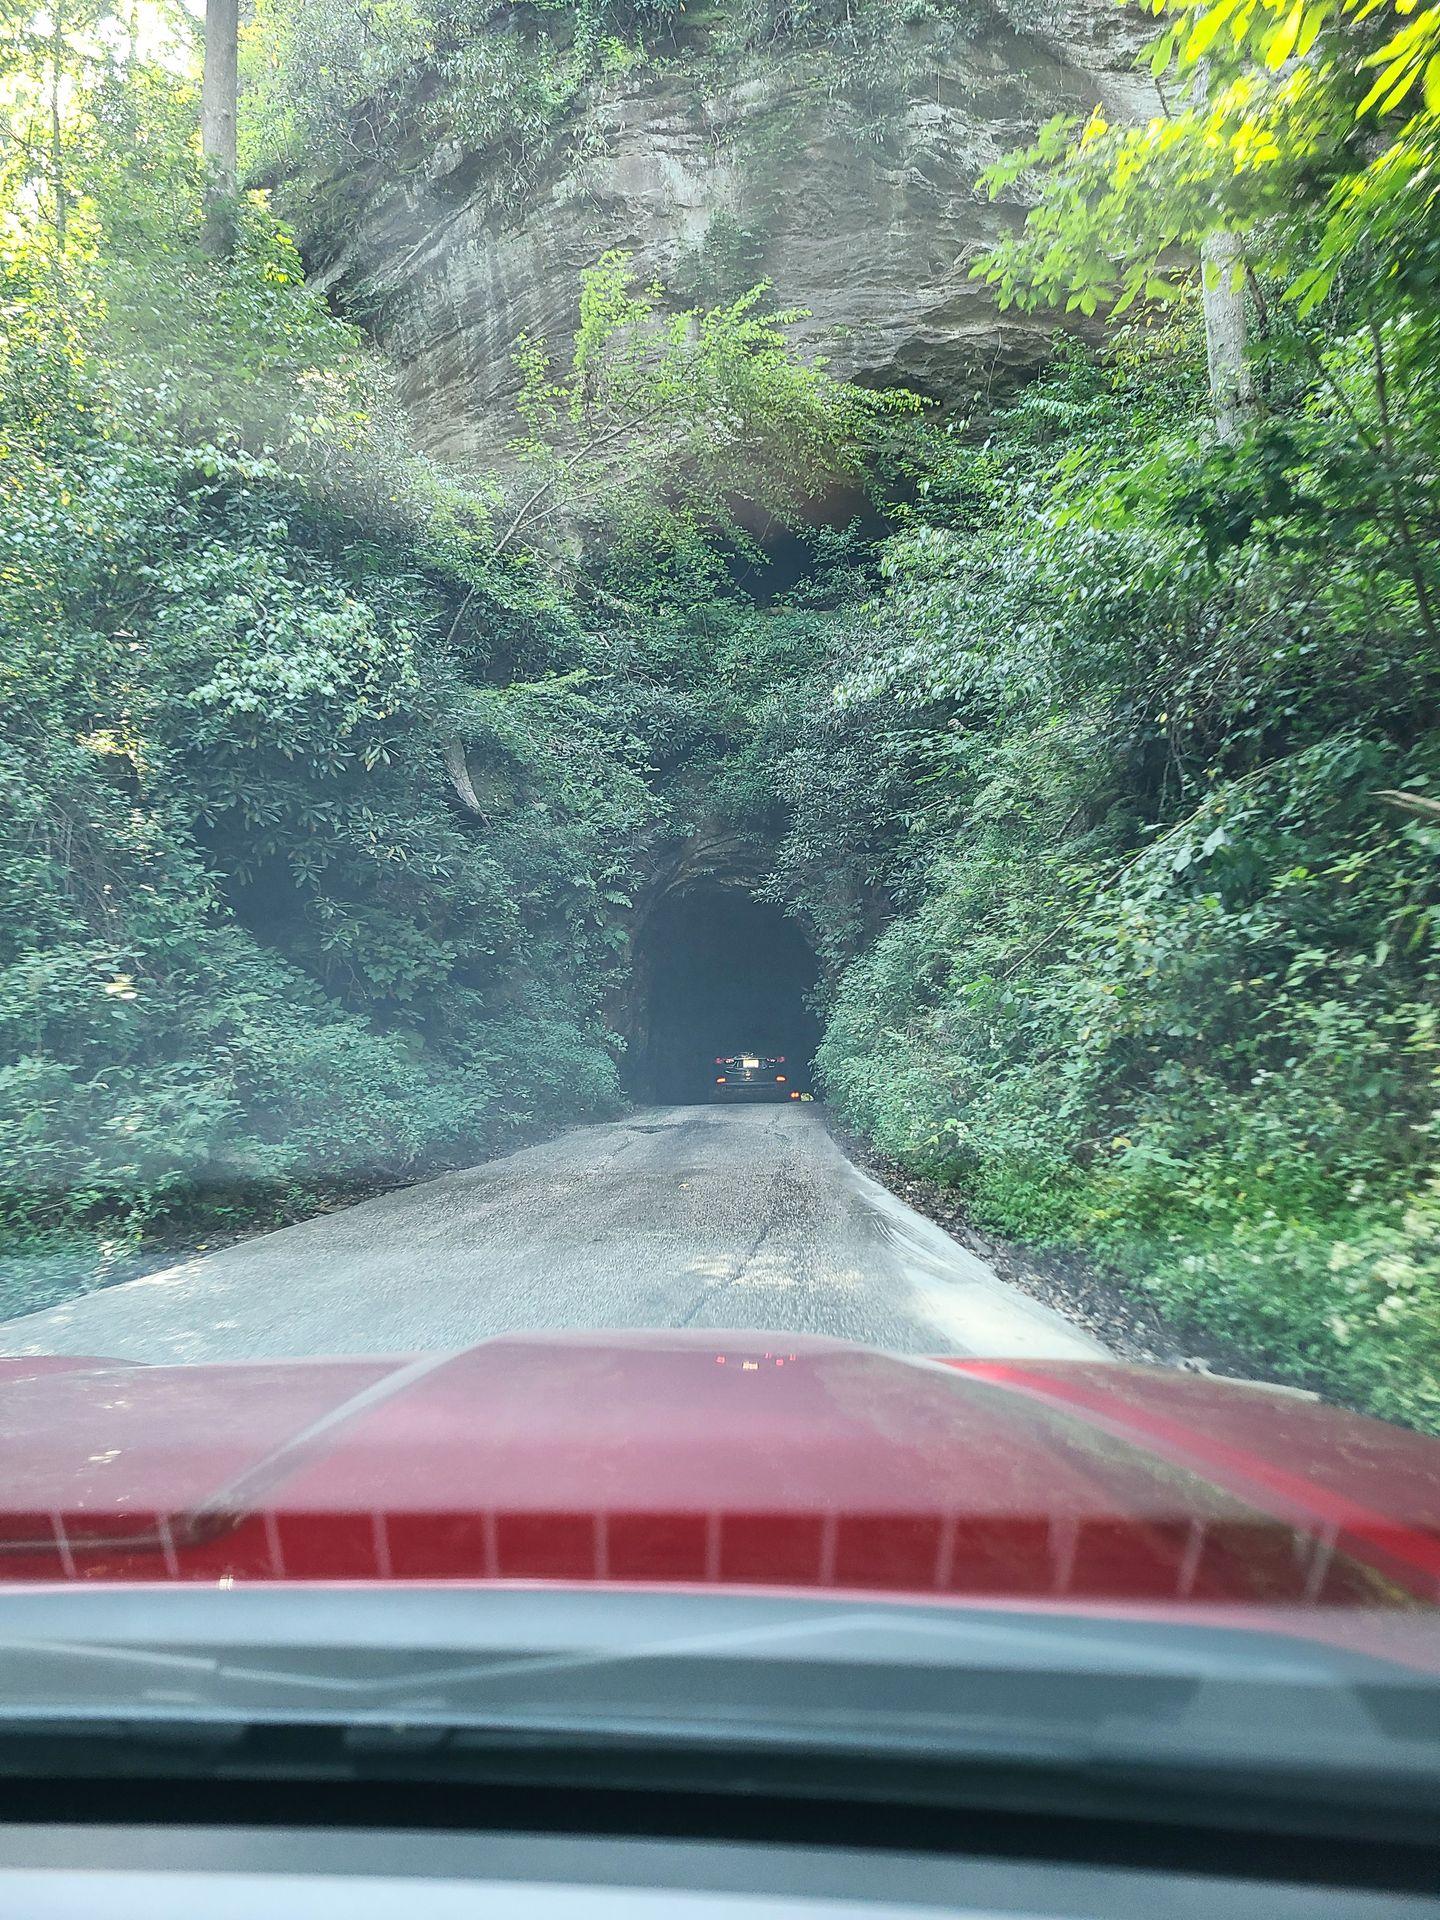 A view of the Nada Tunnel from the window of a car